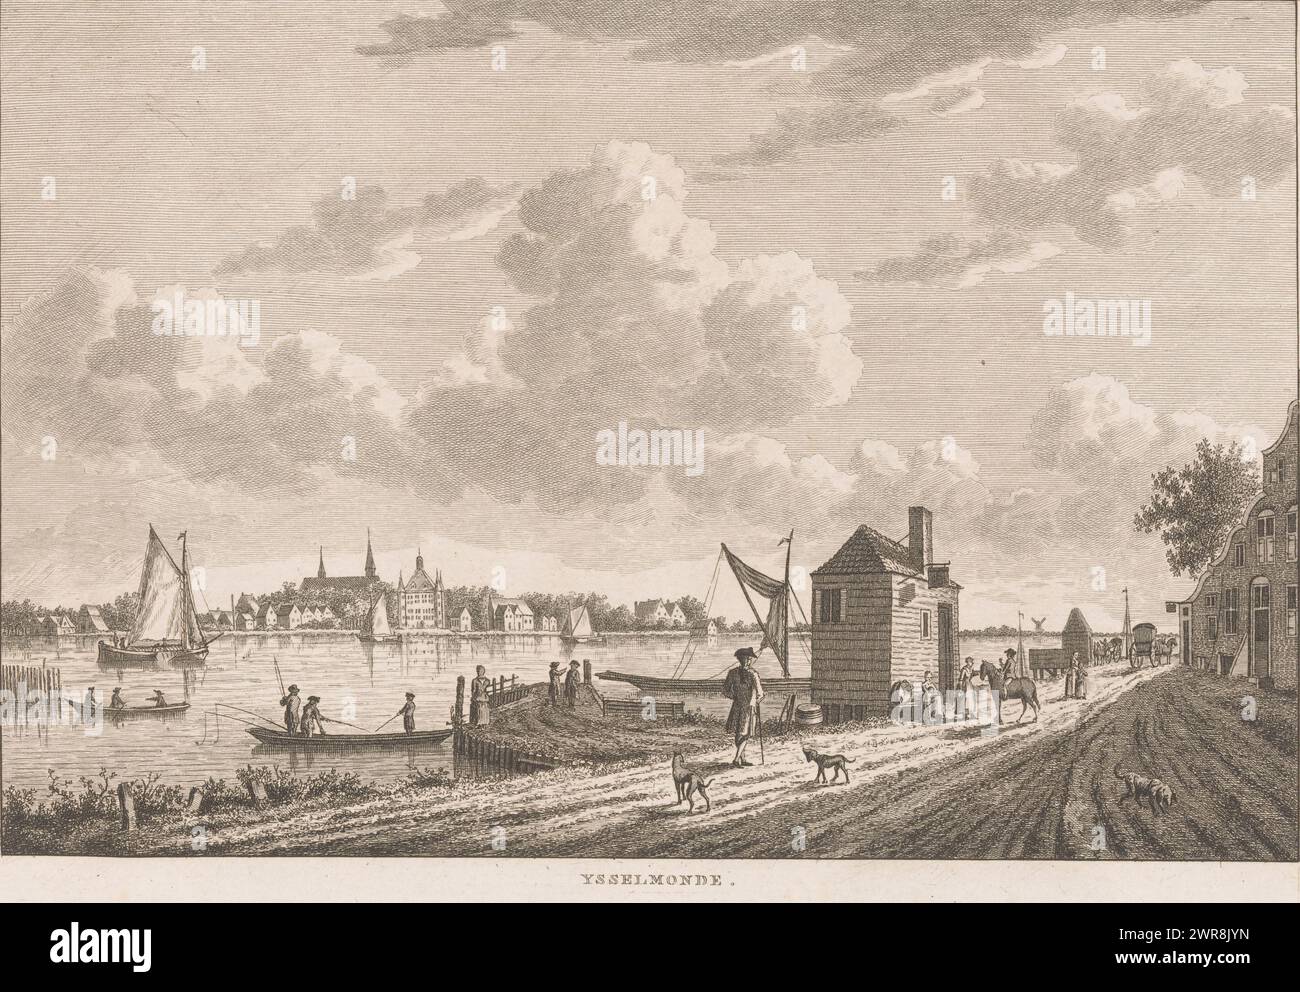 View of IJsselmonde, Ysselmonde (title on object), print maker: Carel Frederik Bendorp (I), after drawing by: Jan Bulthuis, 1786 - 1792, paper, etching, height 175 mm × width 245 mm, print Stock Photo